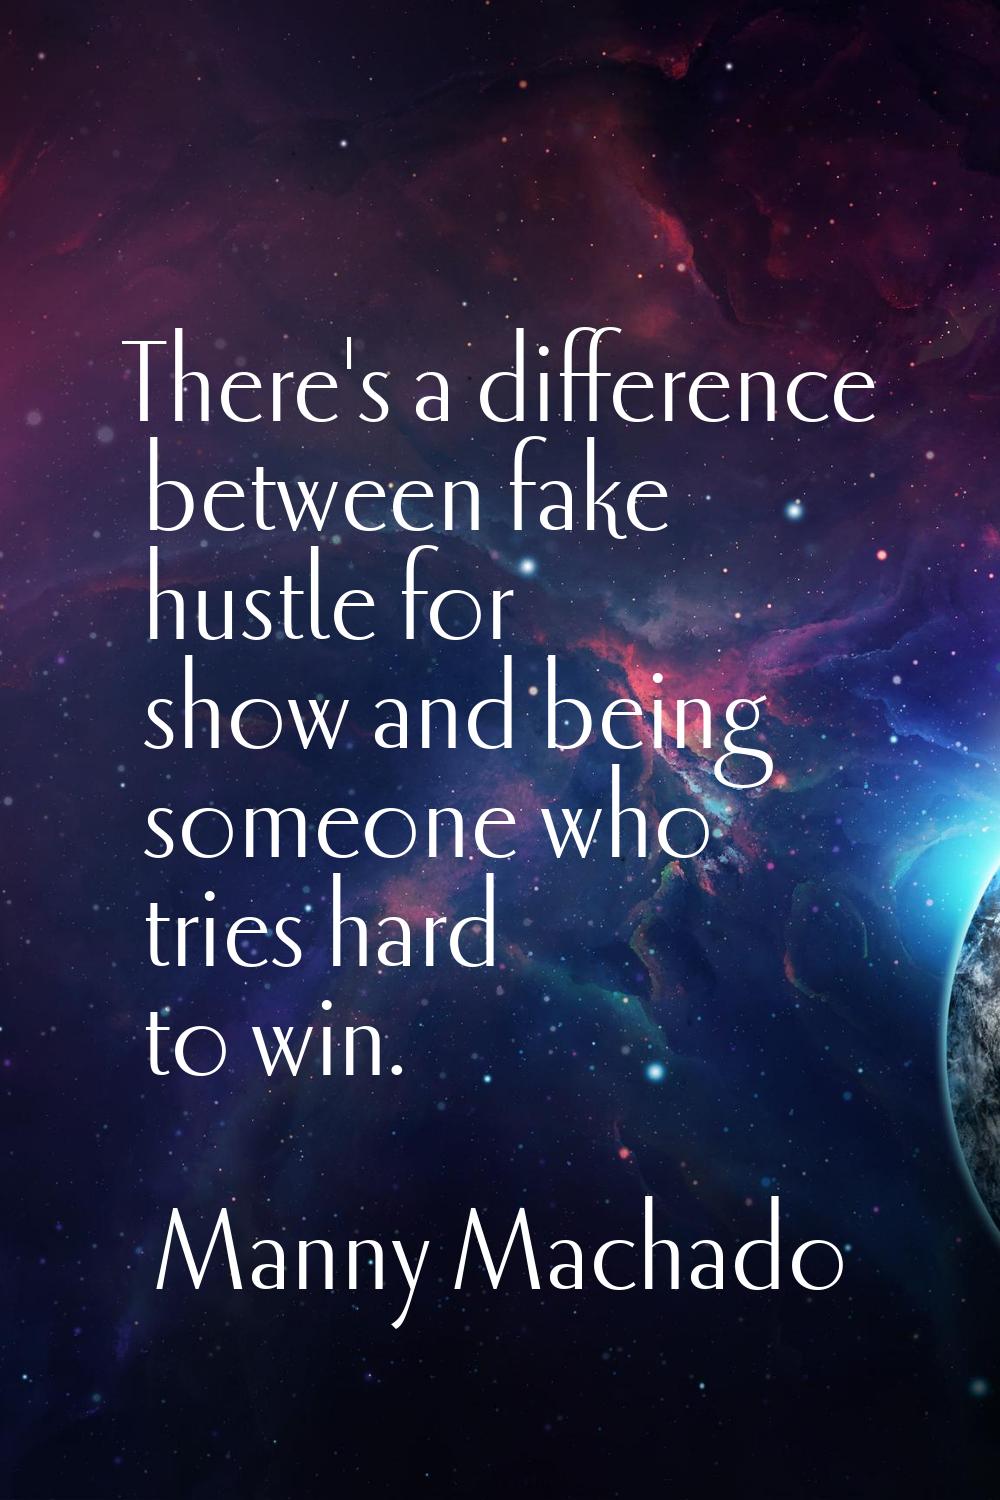 There's a difference between fake hustle for show and being someone who tries hard to win.